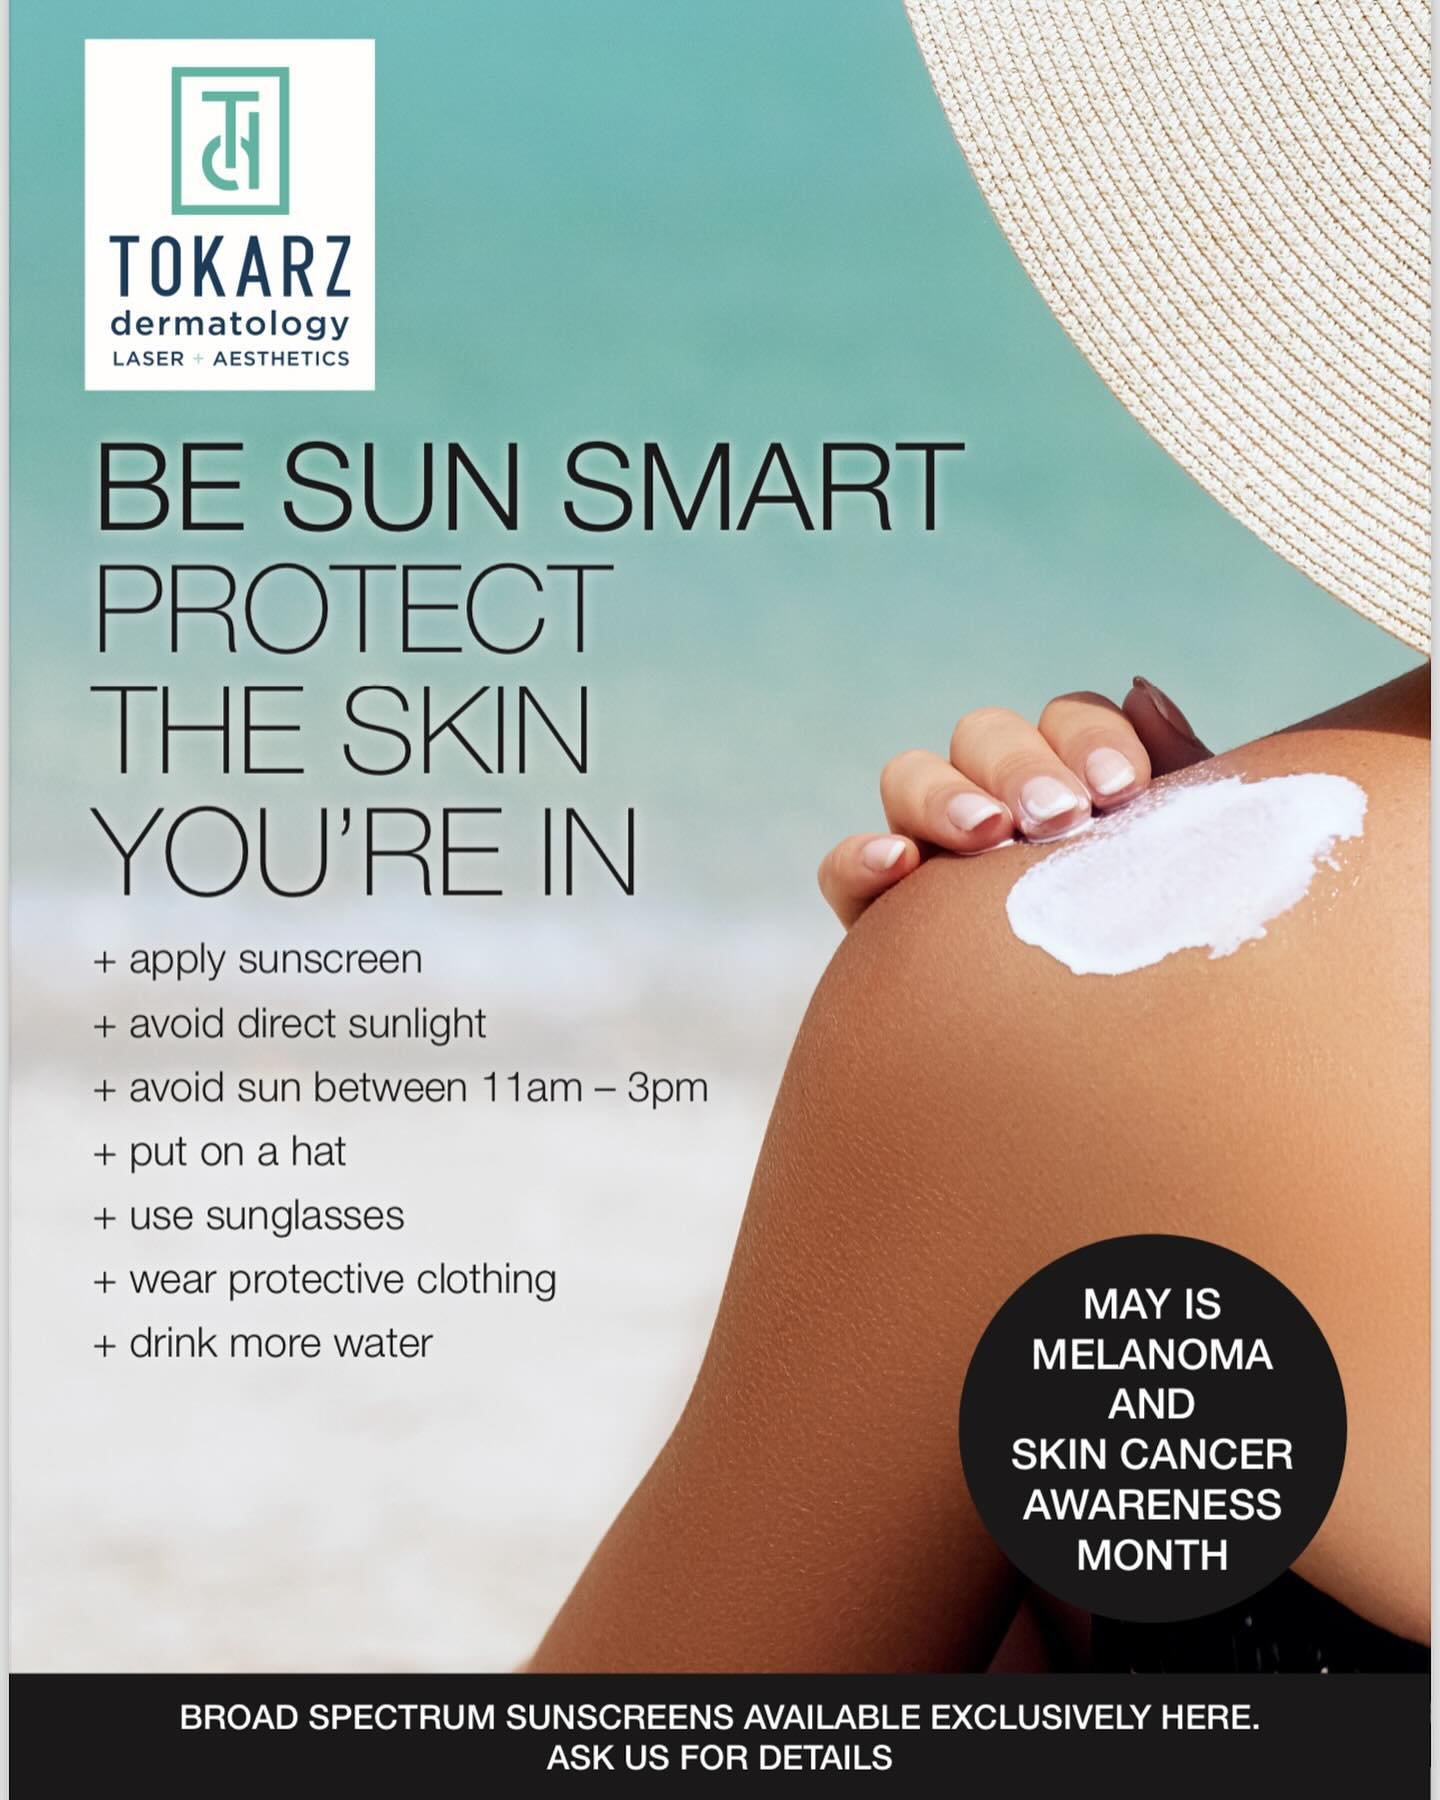 Sun protection not only saves us from skin cancer but wrinkles, sunspots and rosacea flares too! Sensitive skin?- we have nice dermatology quality options here for you. 
.
.
.
#skincancerawareness #stopsundamage #protectyourface #tokarzderm